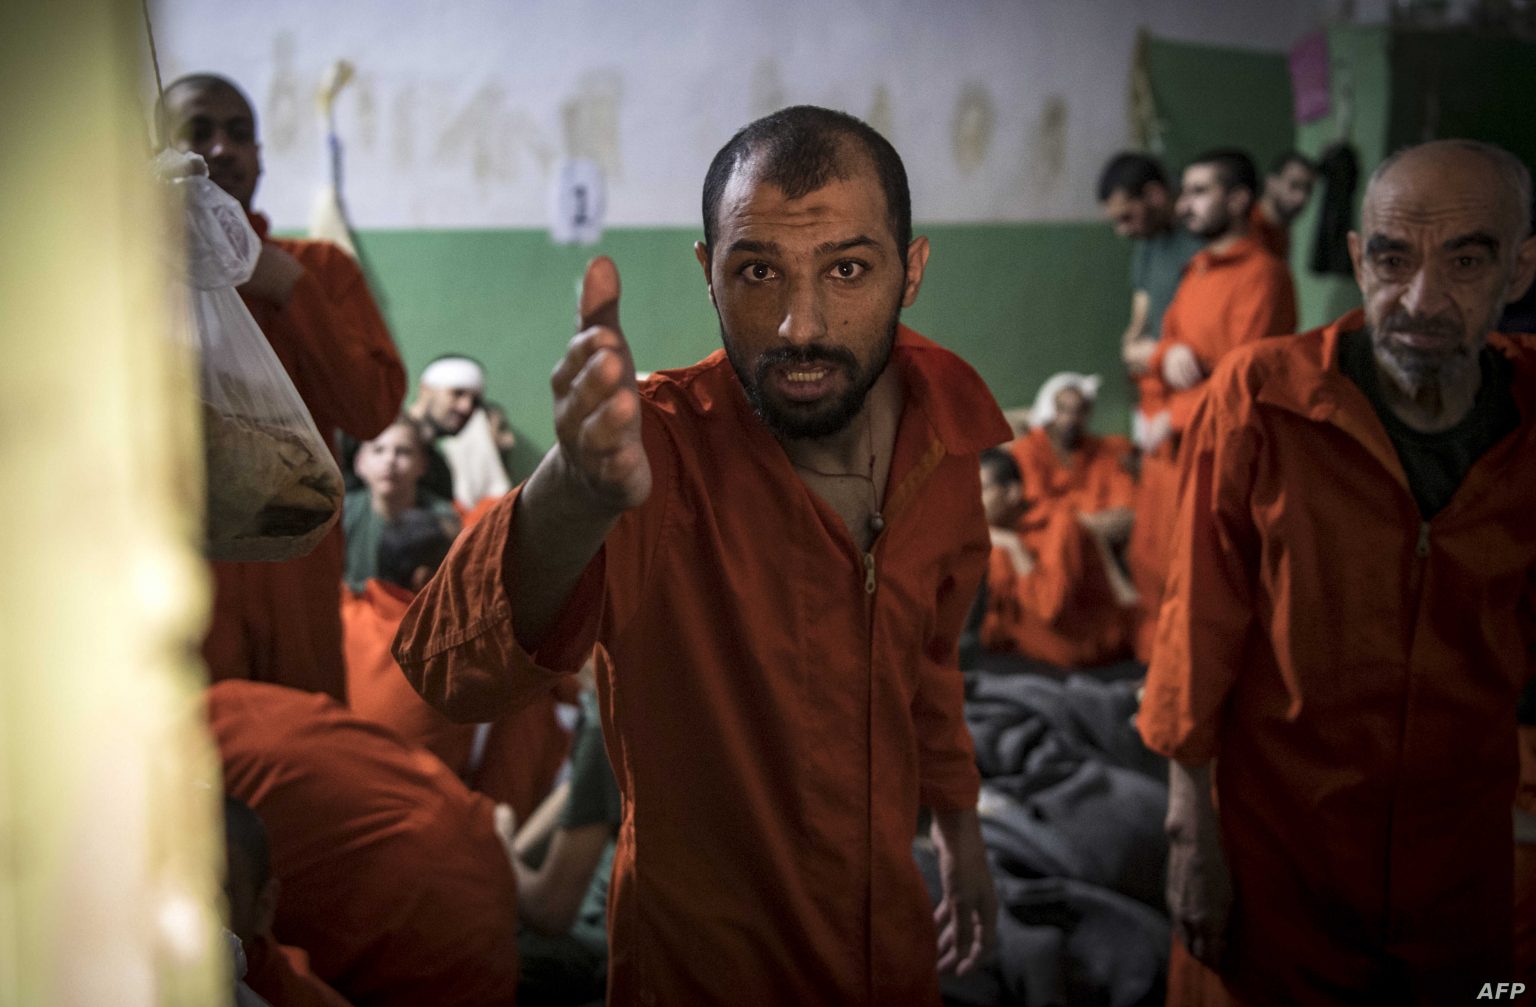 Suspects of affiliation with the Islamic State (IS) held in one of the detention facilities in al-Hasakah, northeastern Syria — 26 October 2019 (AFP\ FADEL SENNA)